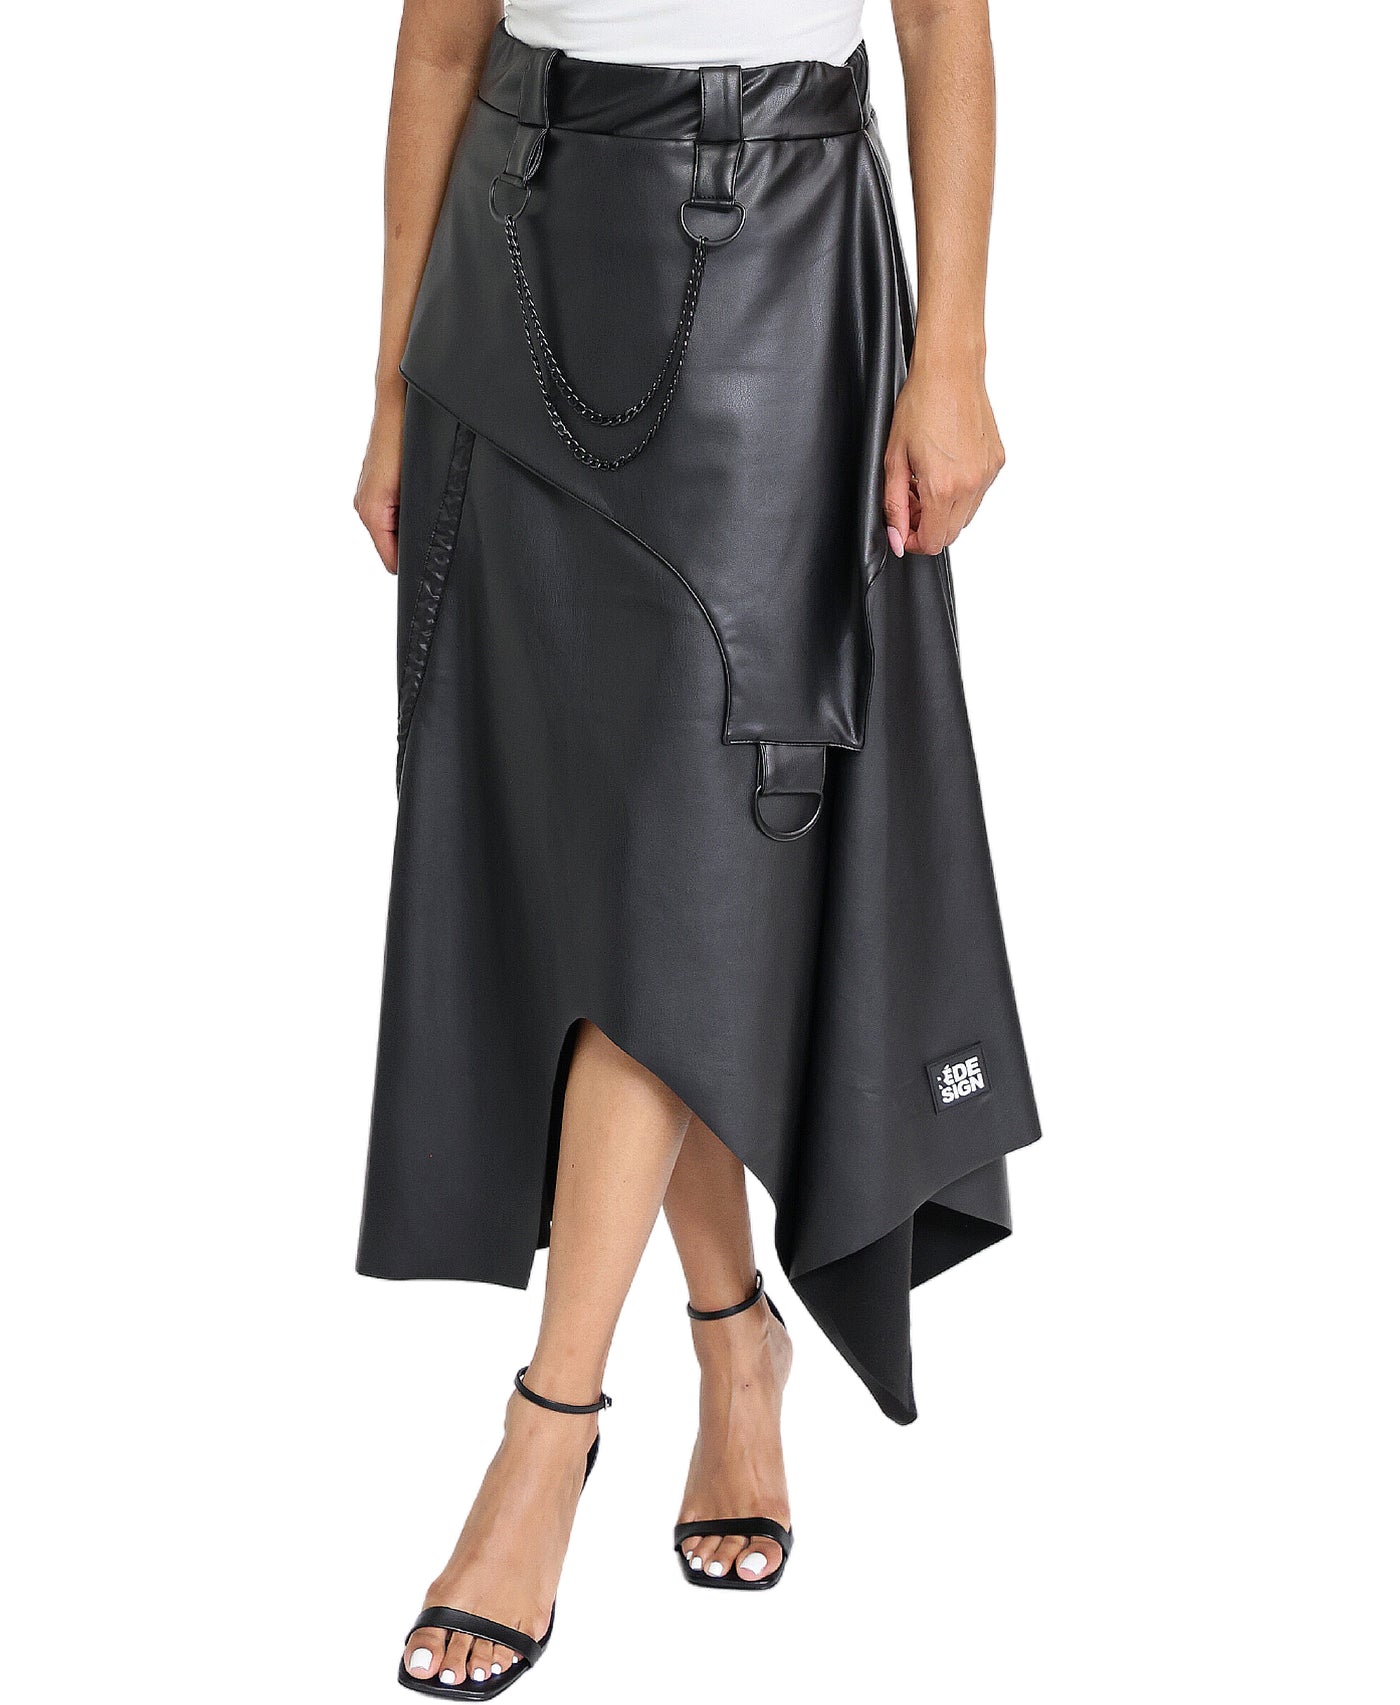 Faux Leather Hi Lo Skirt w/ Chain image 1